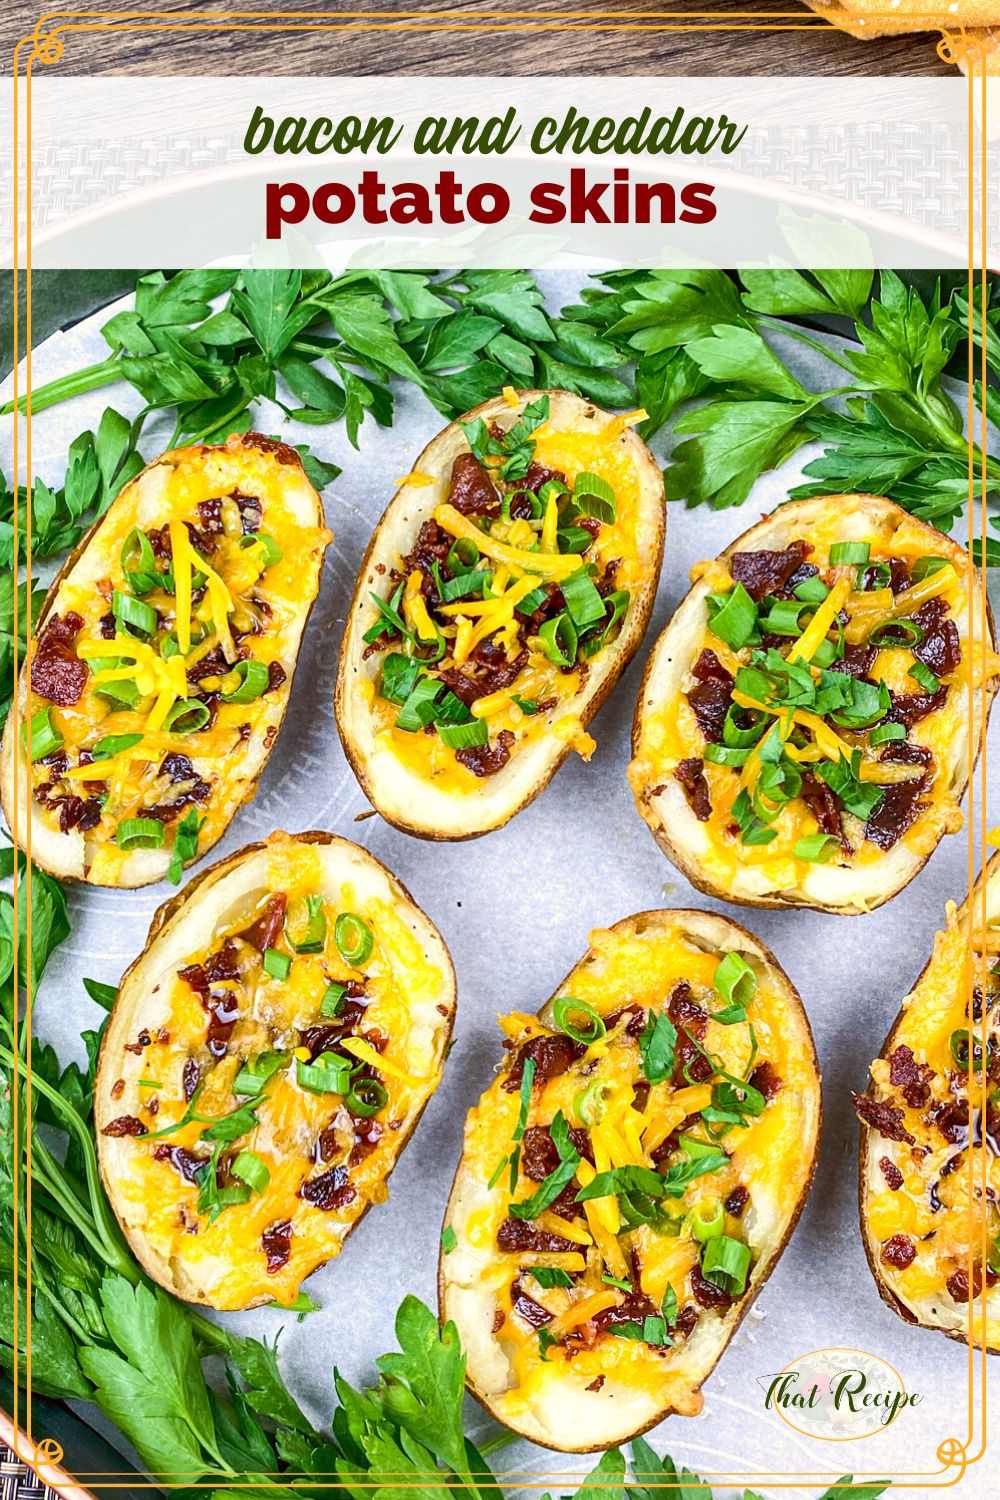 top down view of potato skins with text overlay "bacon and cheddar potato skins"